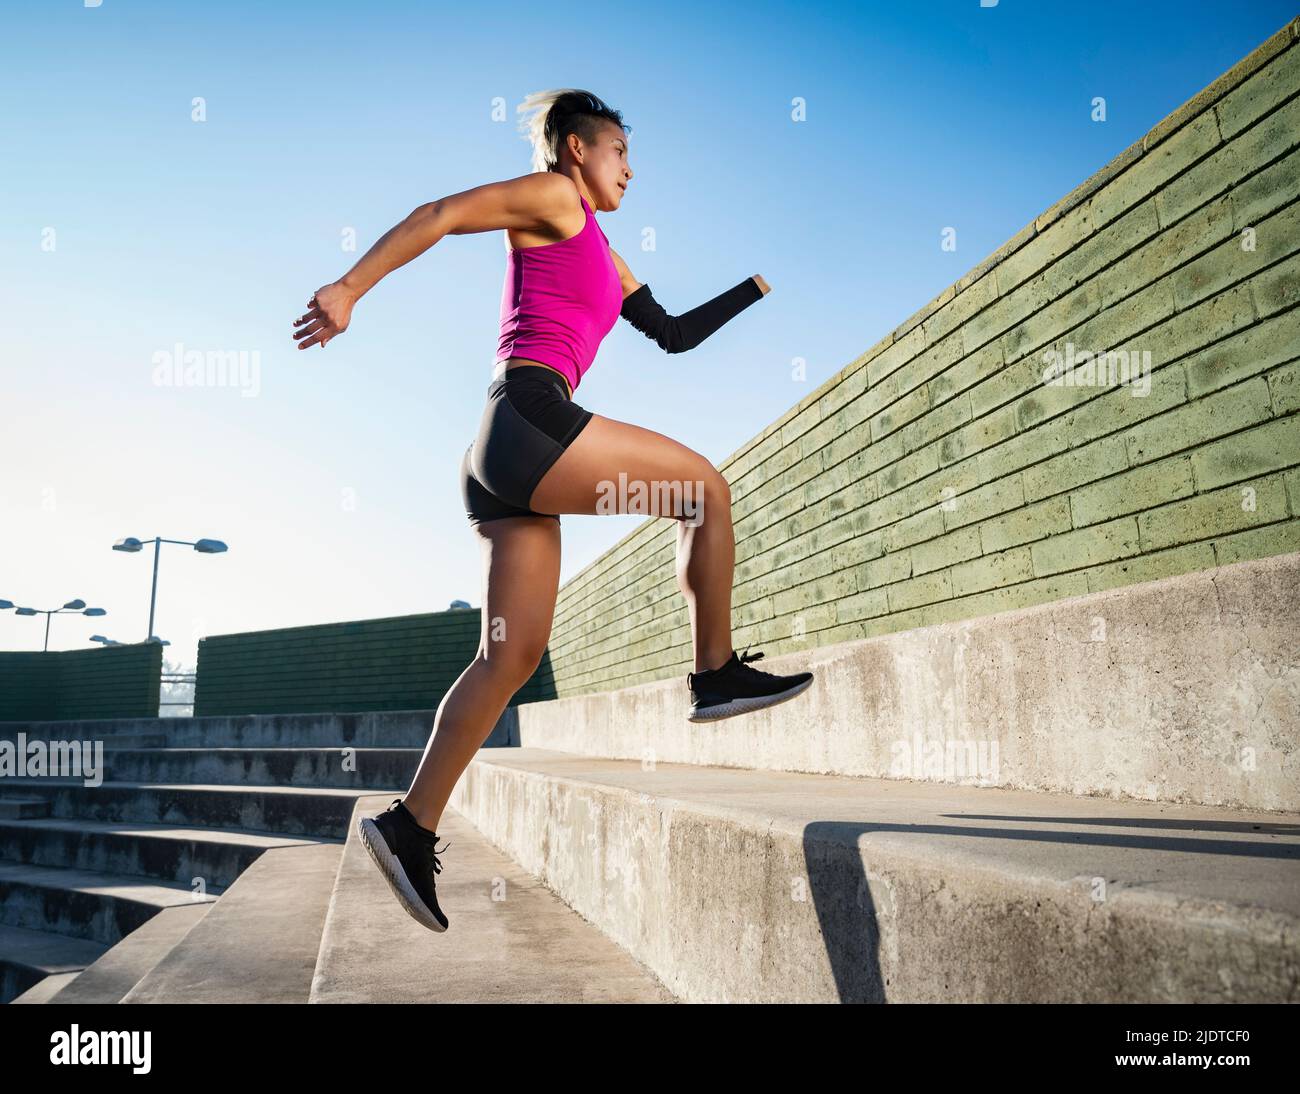 Athletic woman with amputated hand running up steps Stock Photo